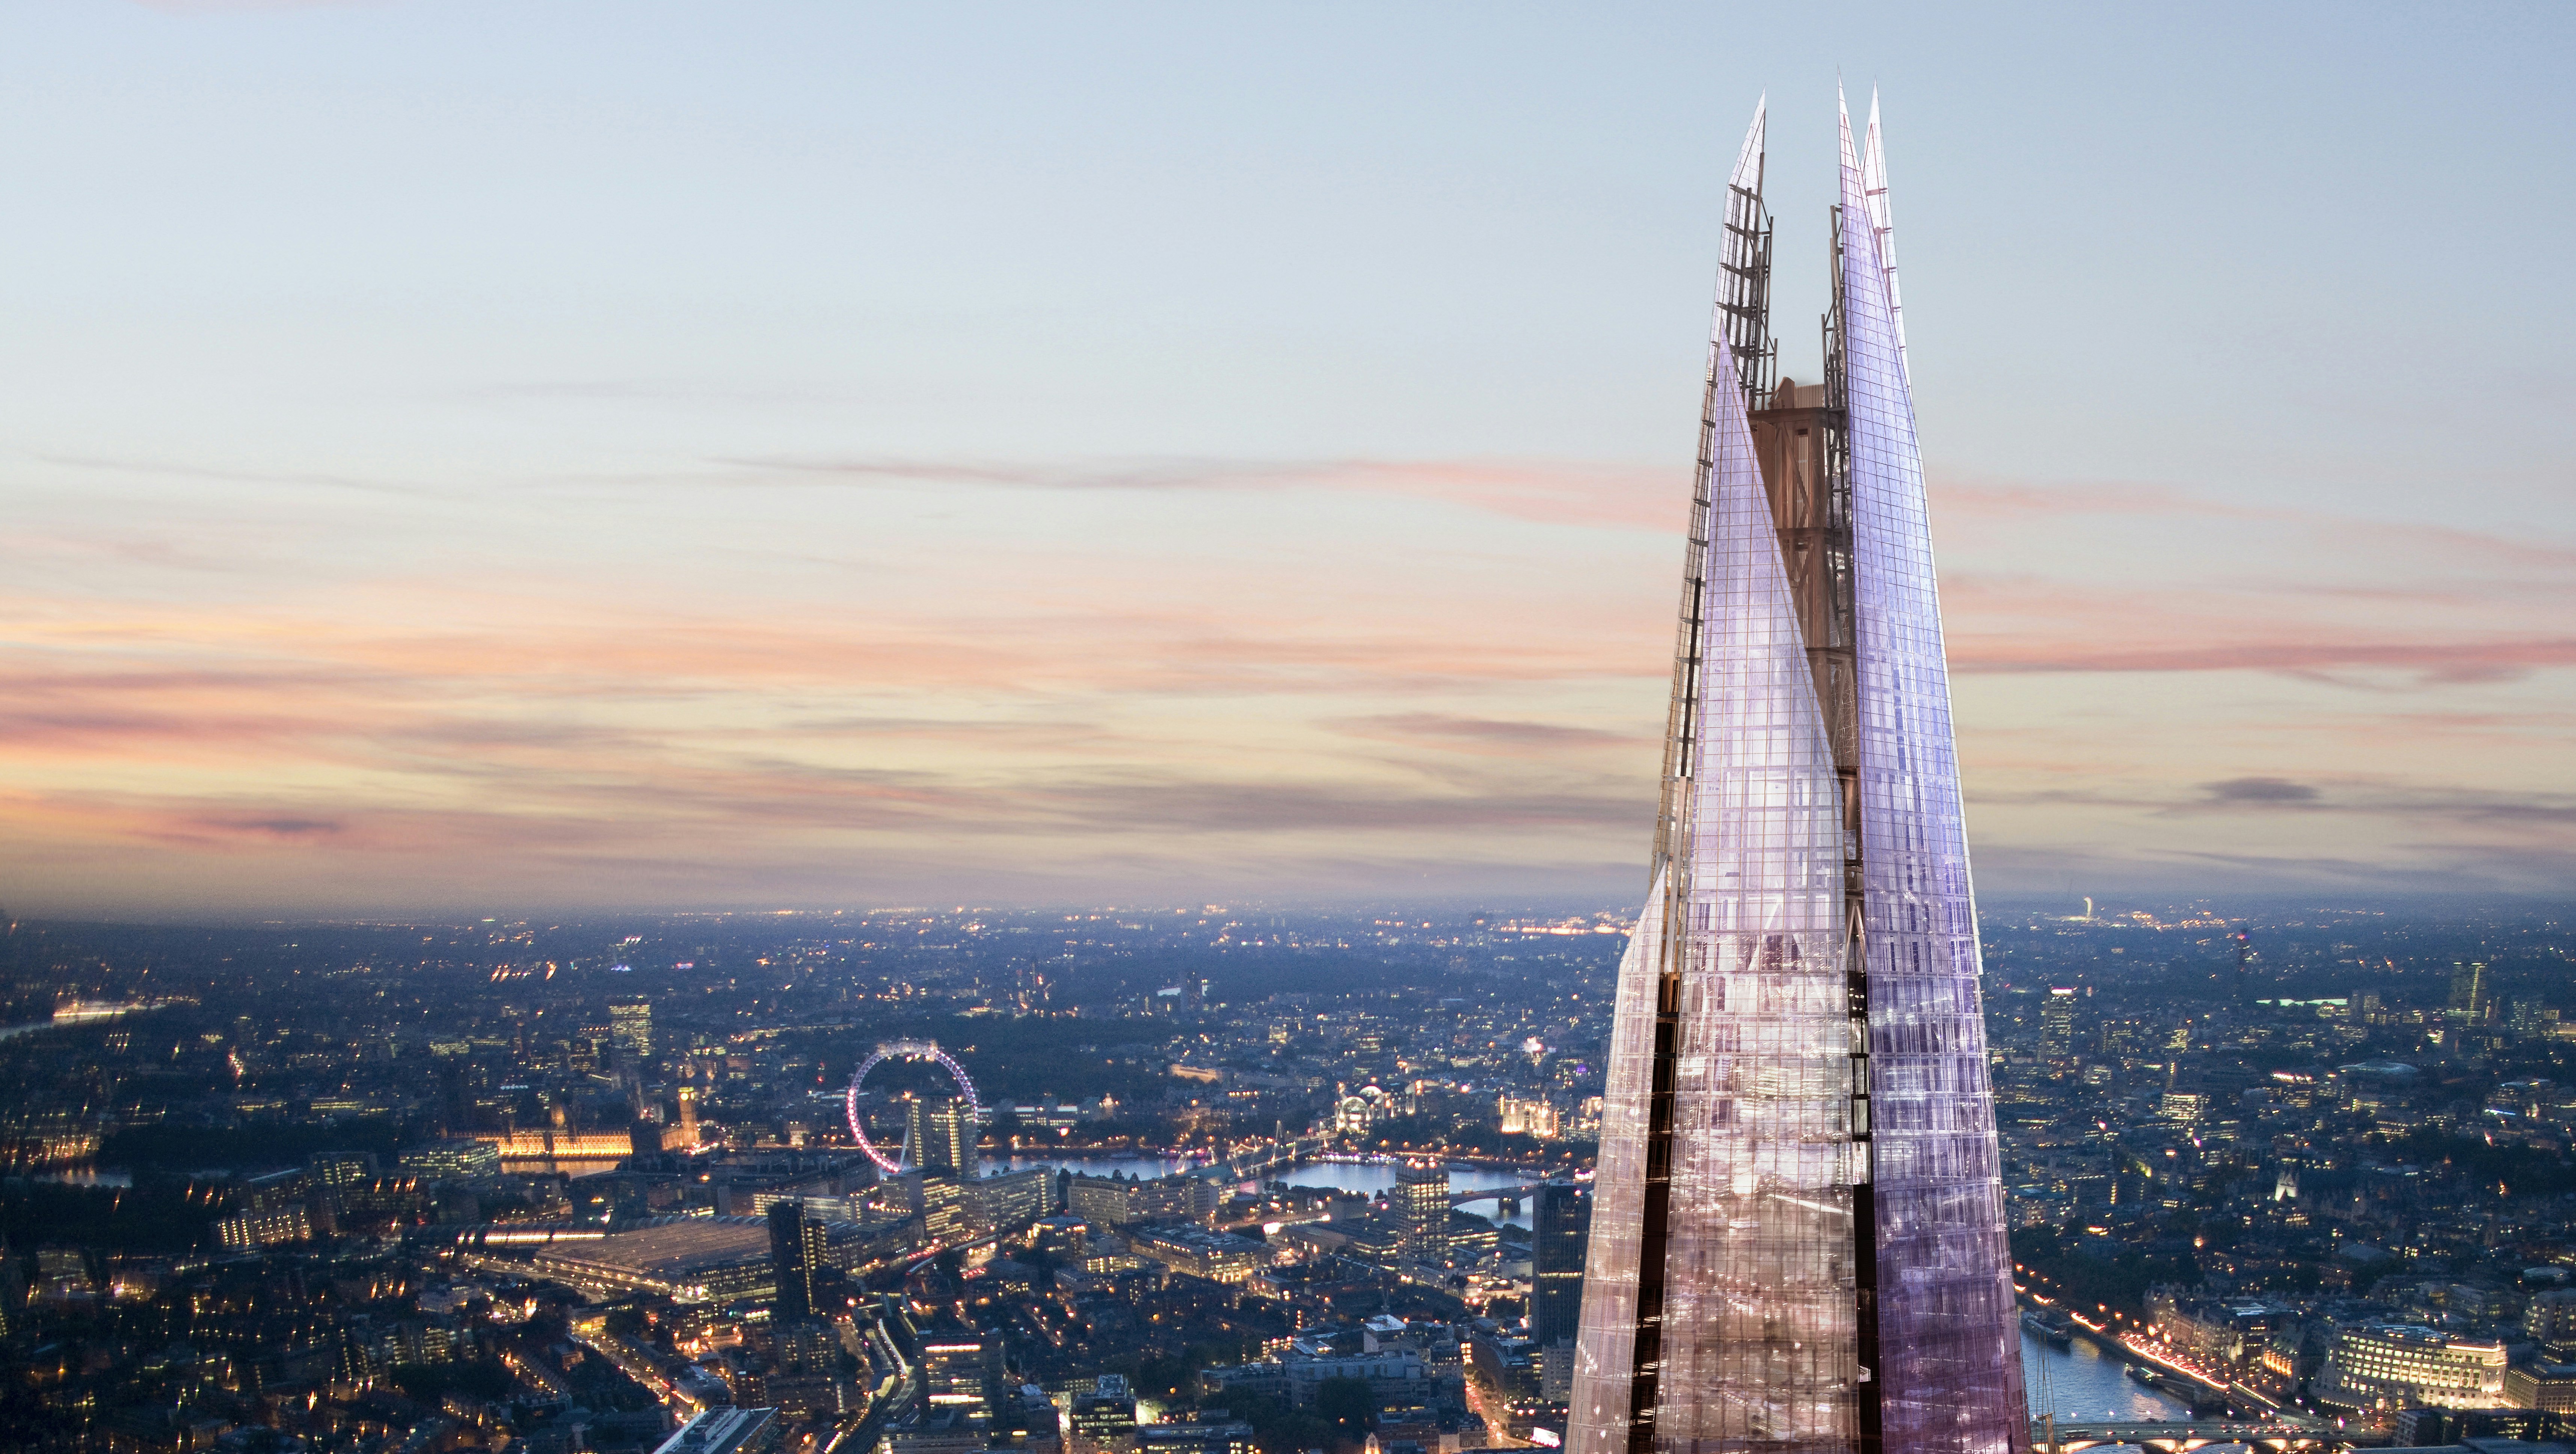 The View From The Shard - Exclusive hire image 1